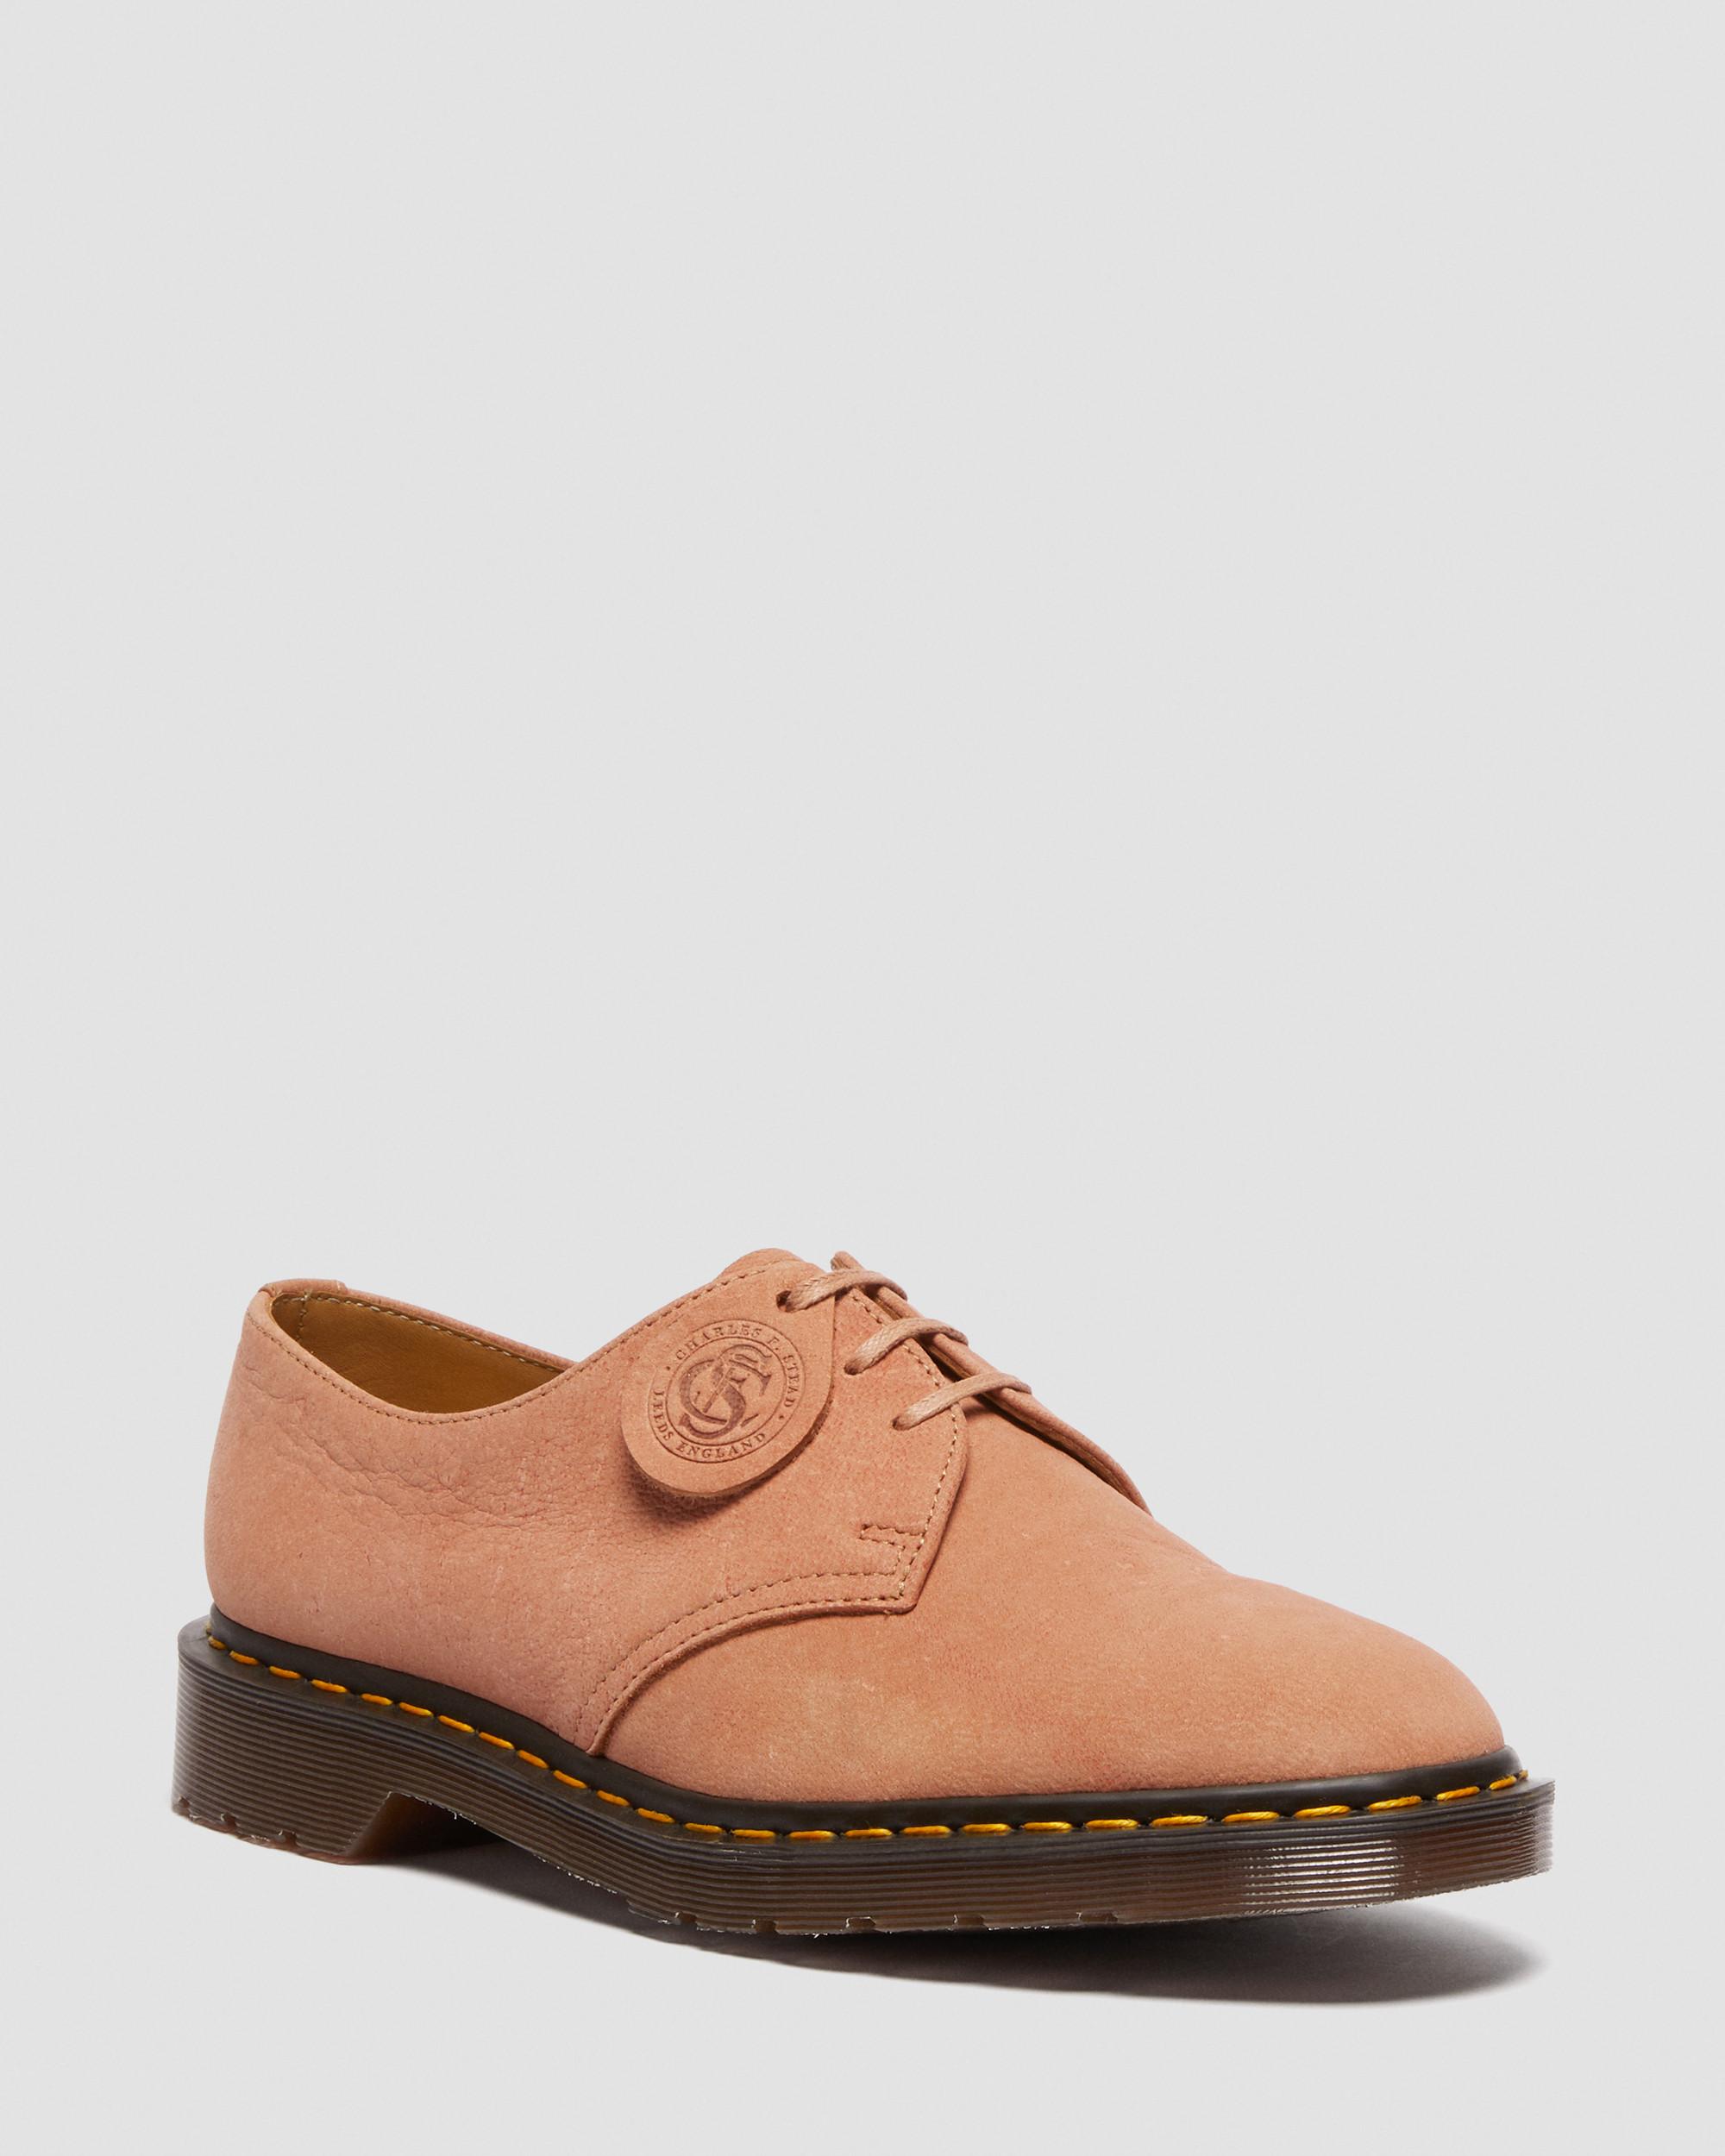 1461 Made in England Nubuck Leather Oxford Shoes in Pink | Dr. Martens